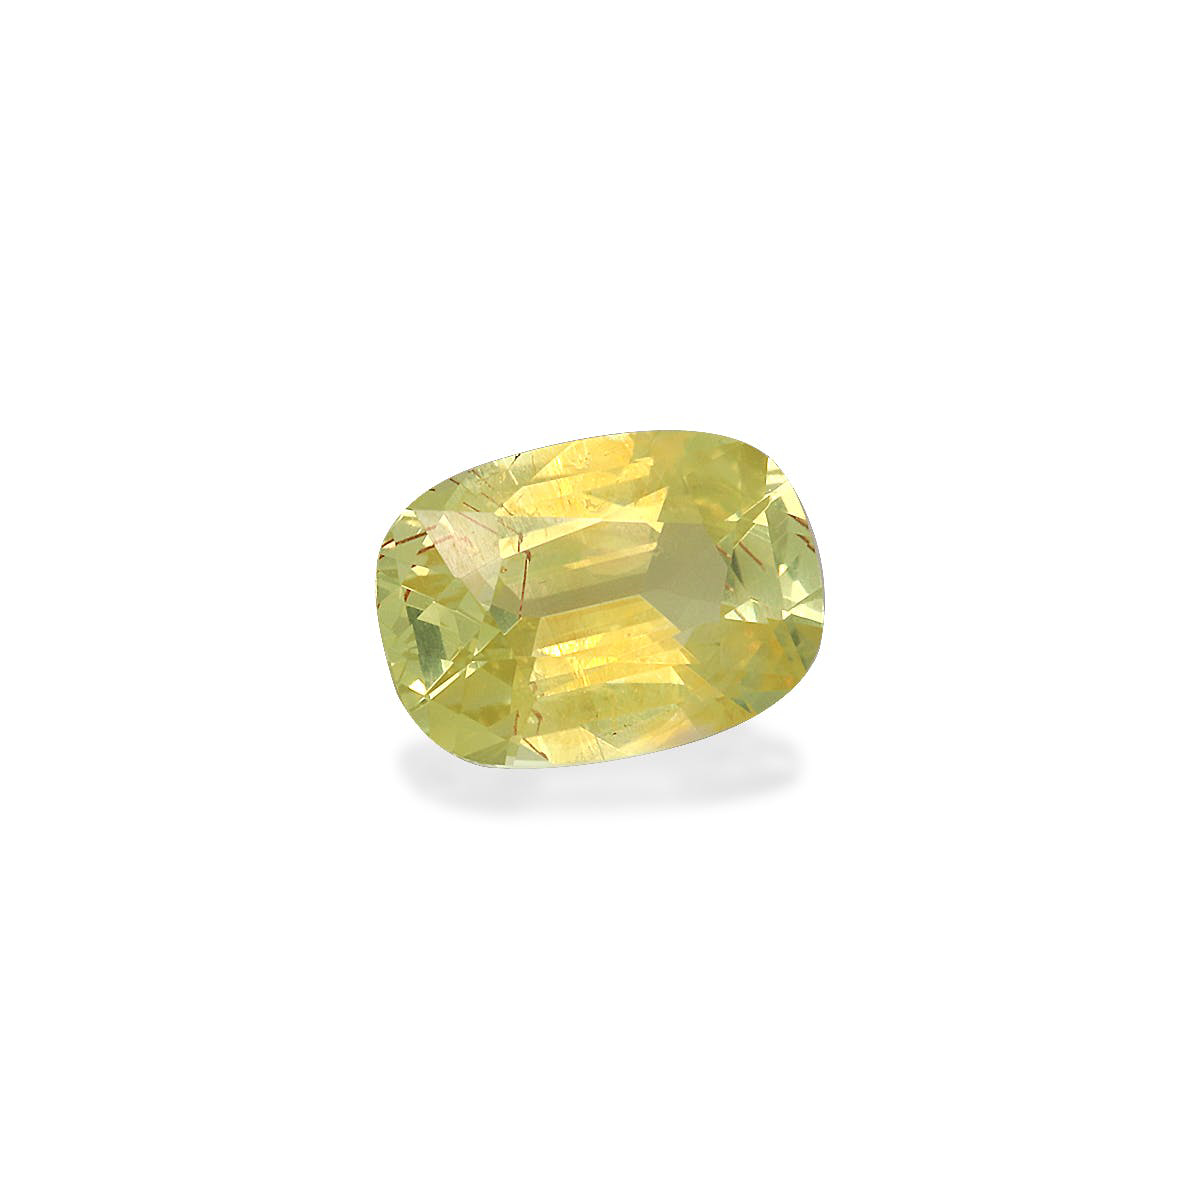 Picture of Yellow Chrysoberyl 1.85ct - 8x6mm (CB0202)